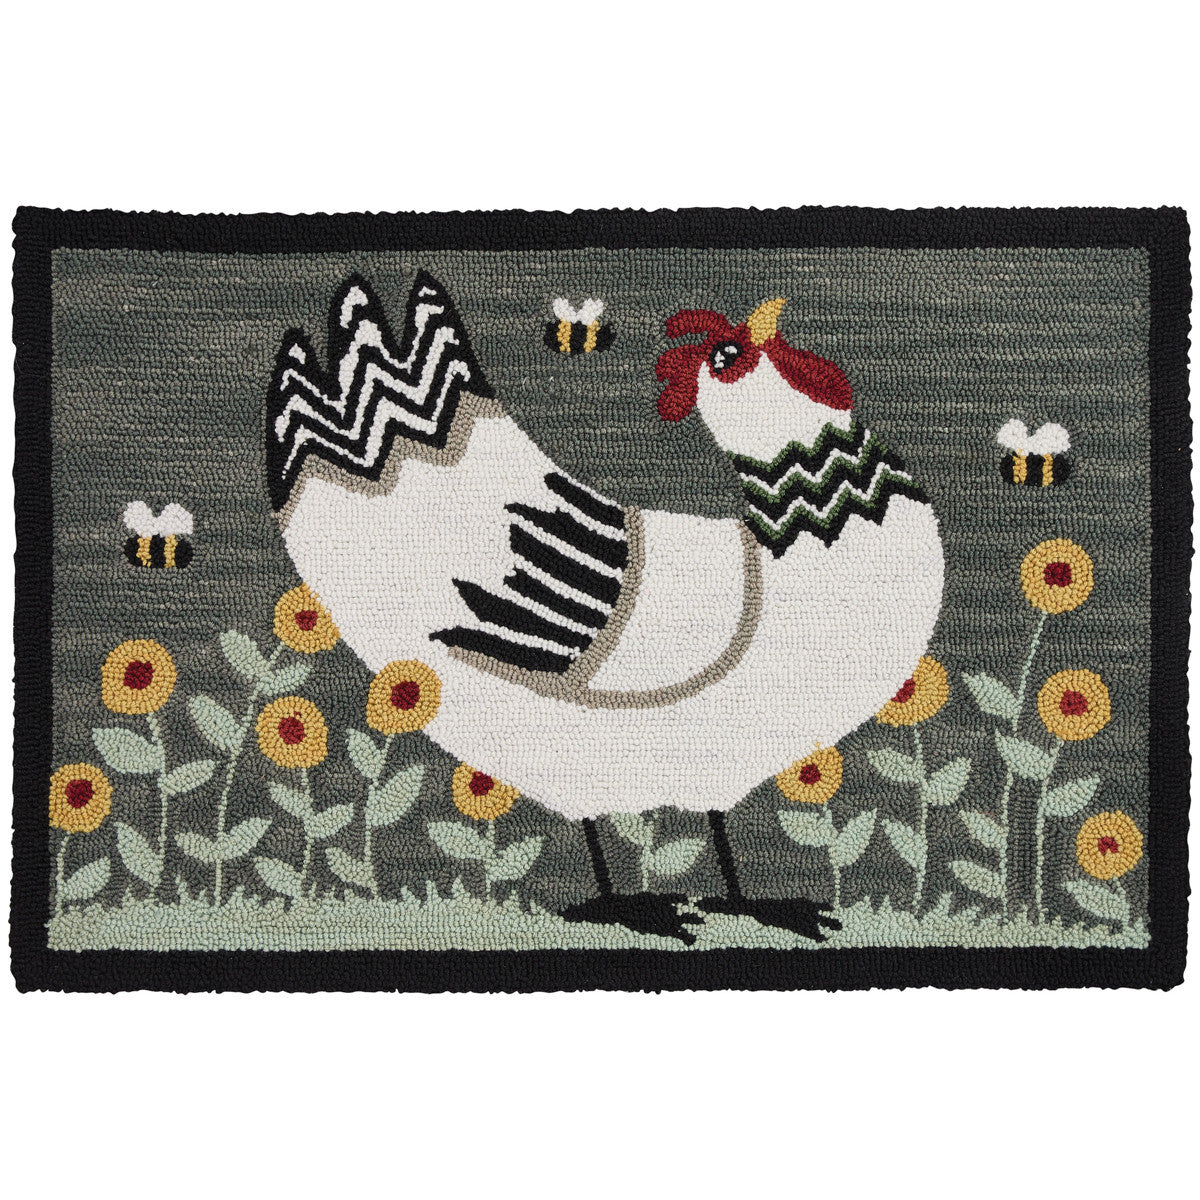 My Little White Hen Hooked Rug 2' x 3' Set of 2 Park Designs